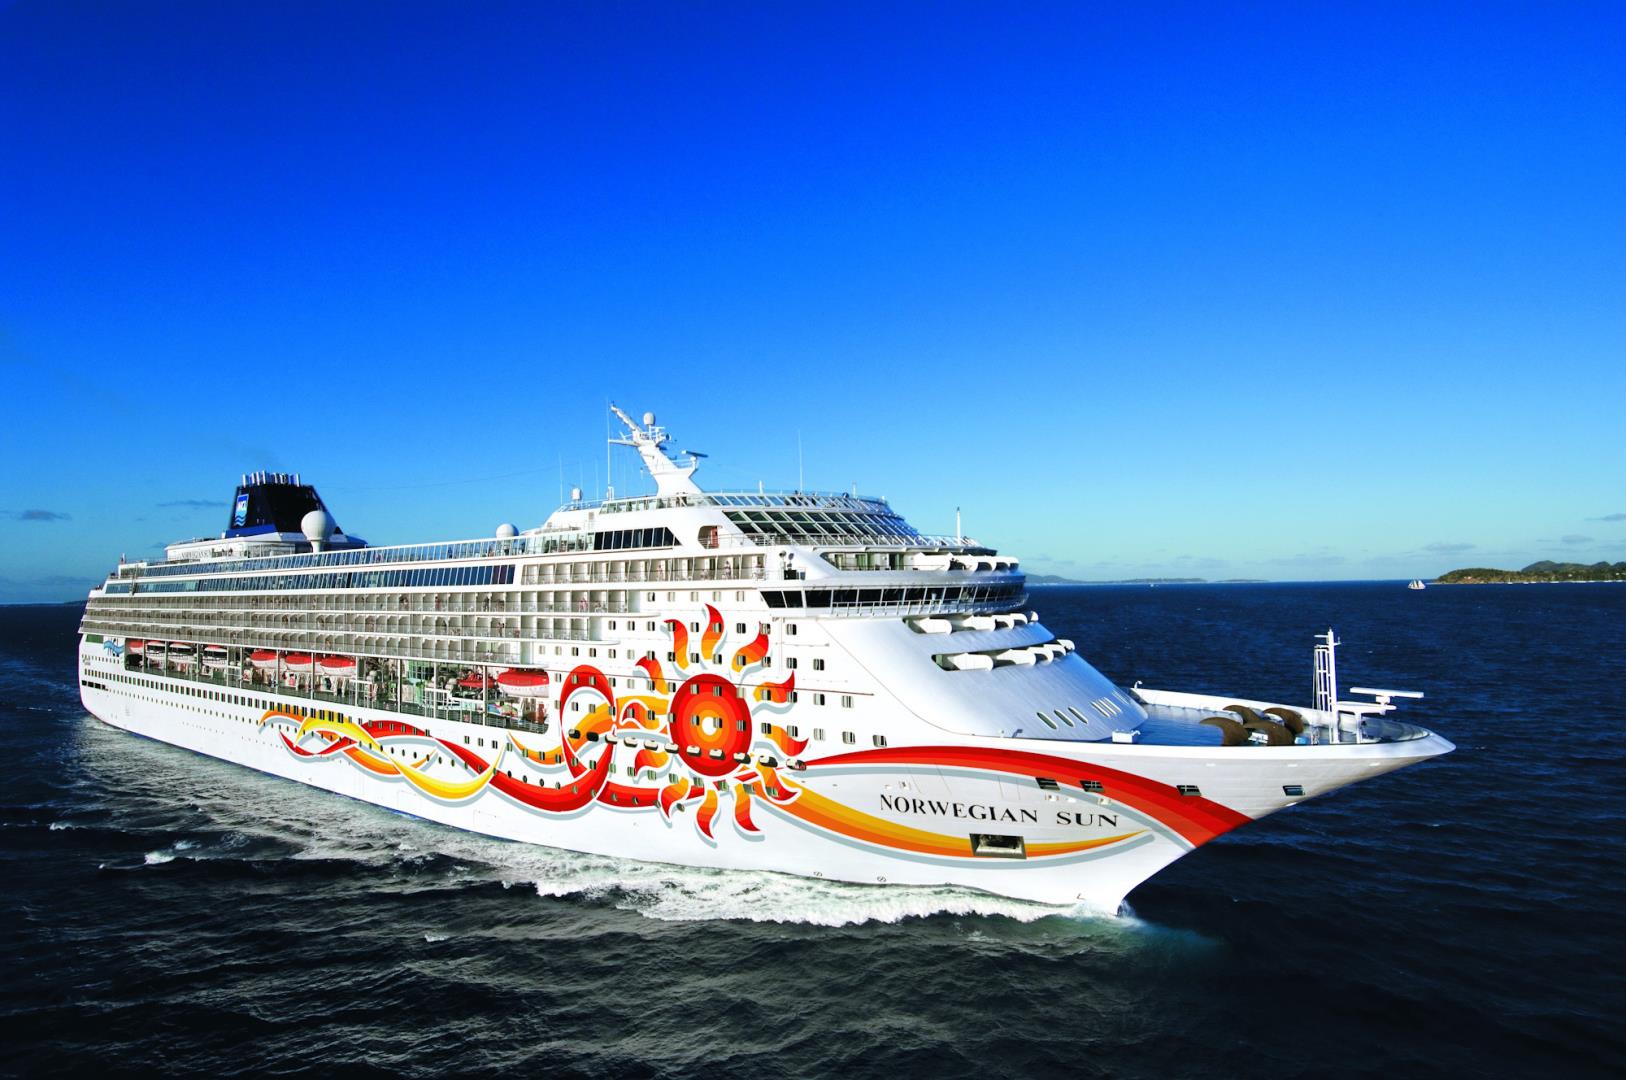 9-day Cruise to Europe: Portugal, Spain & Canary Islands from Lisbon, Portugal on Norwegian Sun